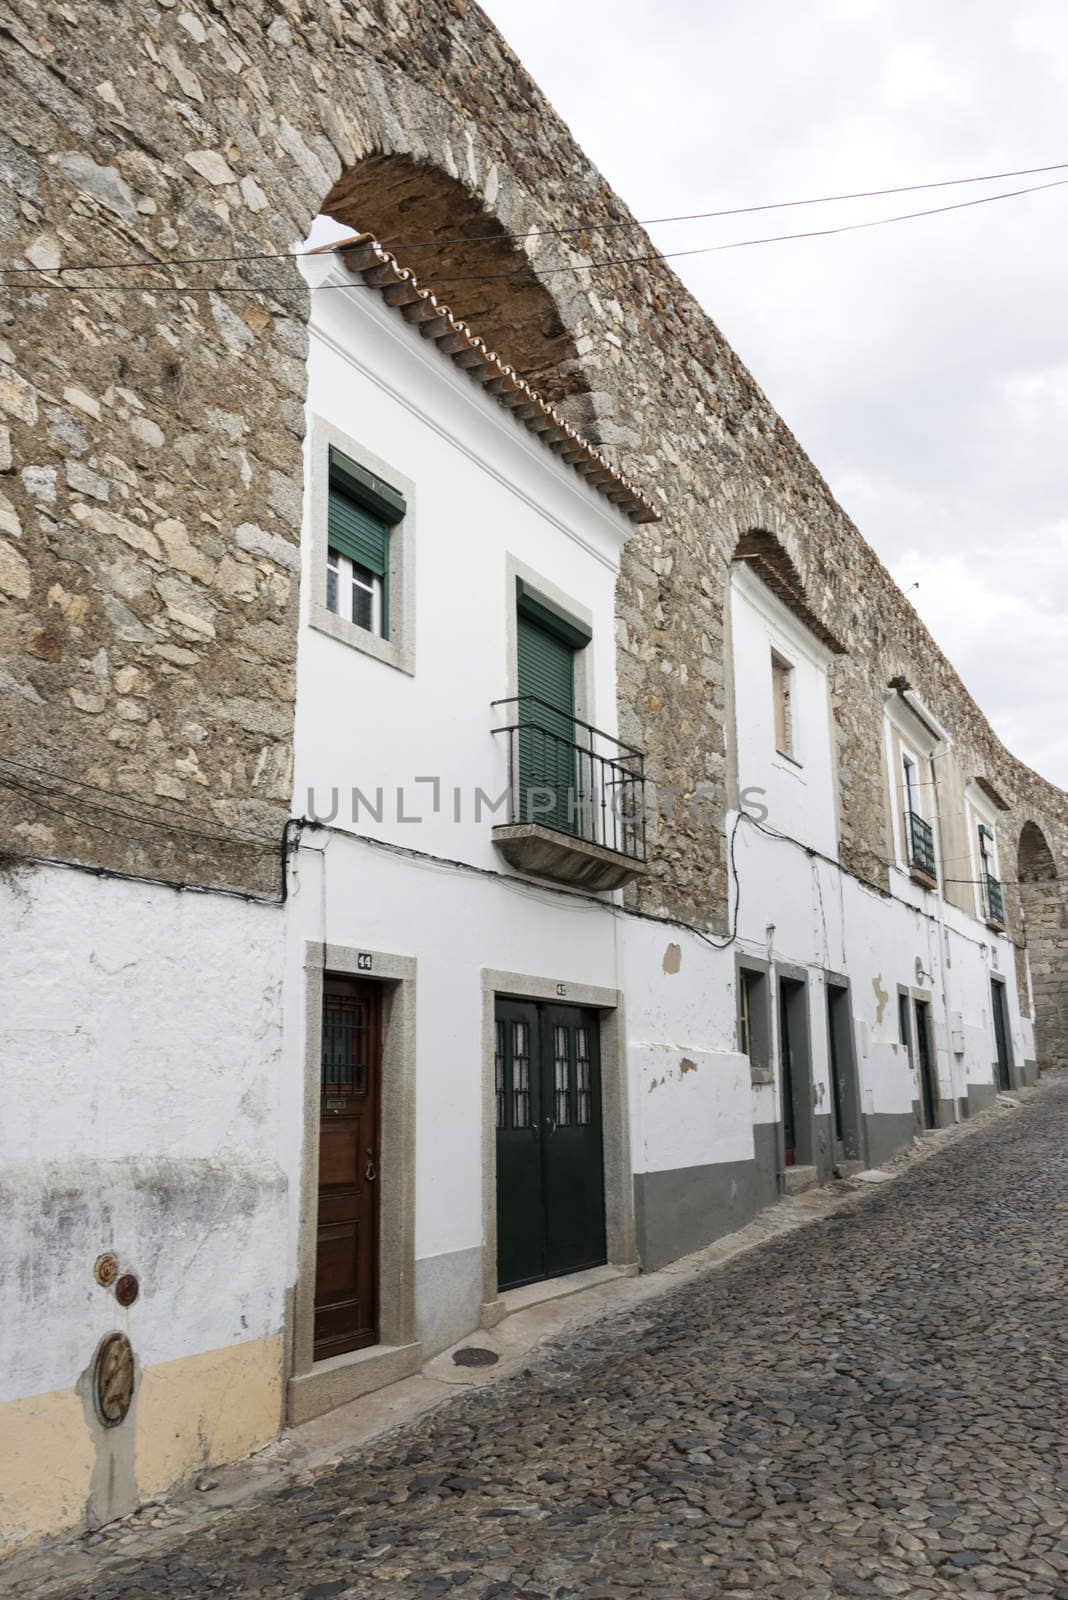 houses in evora by compuinfoto